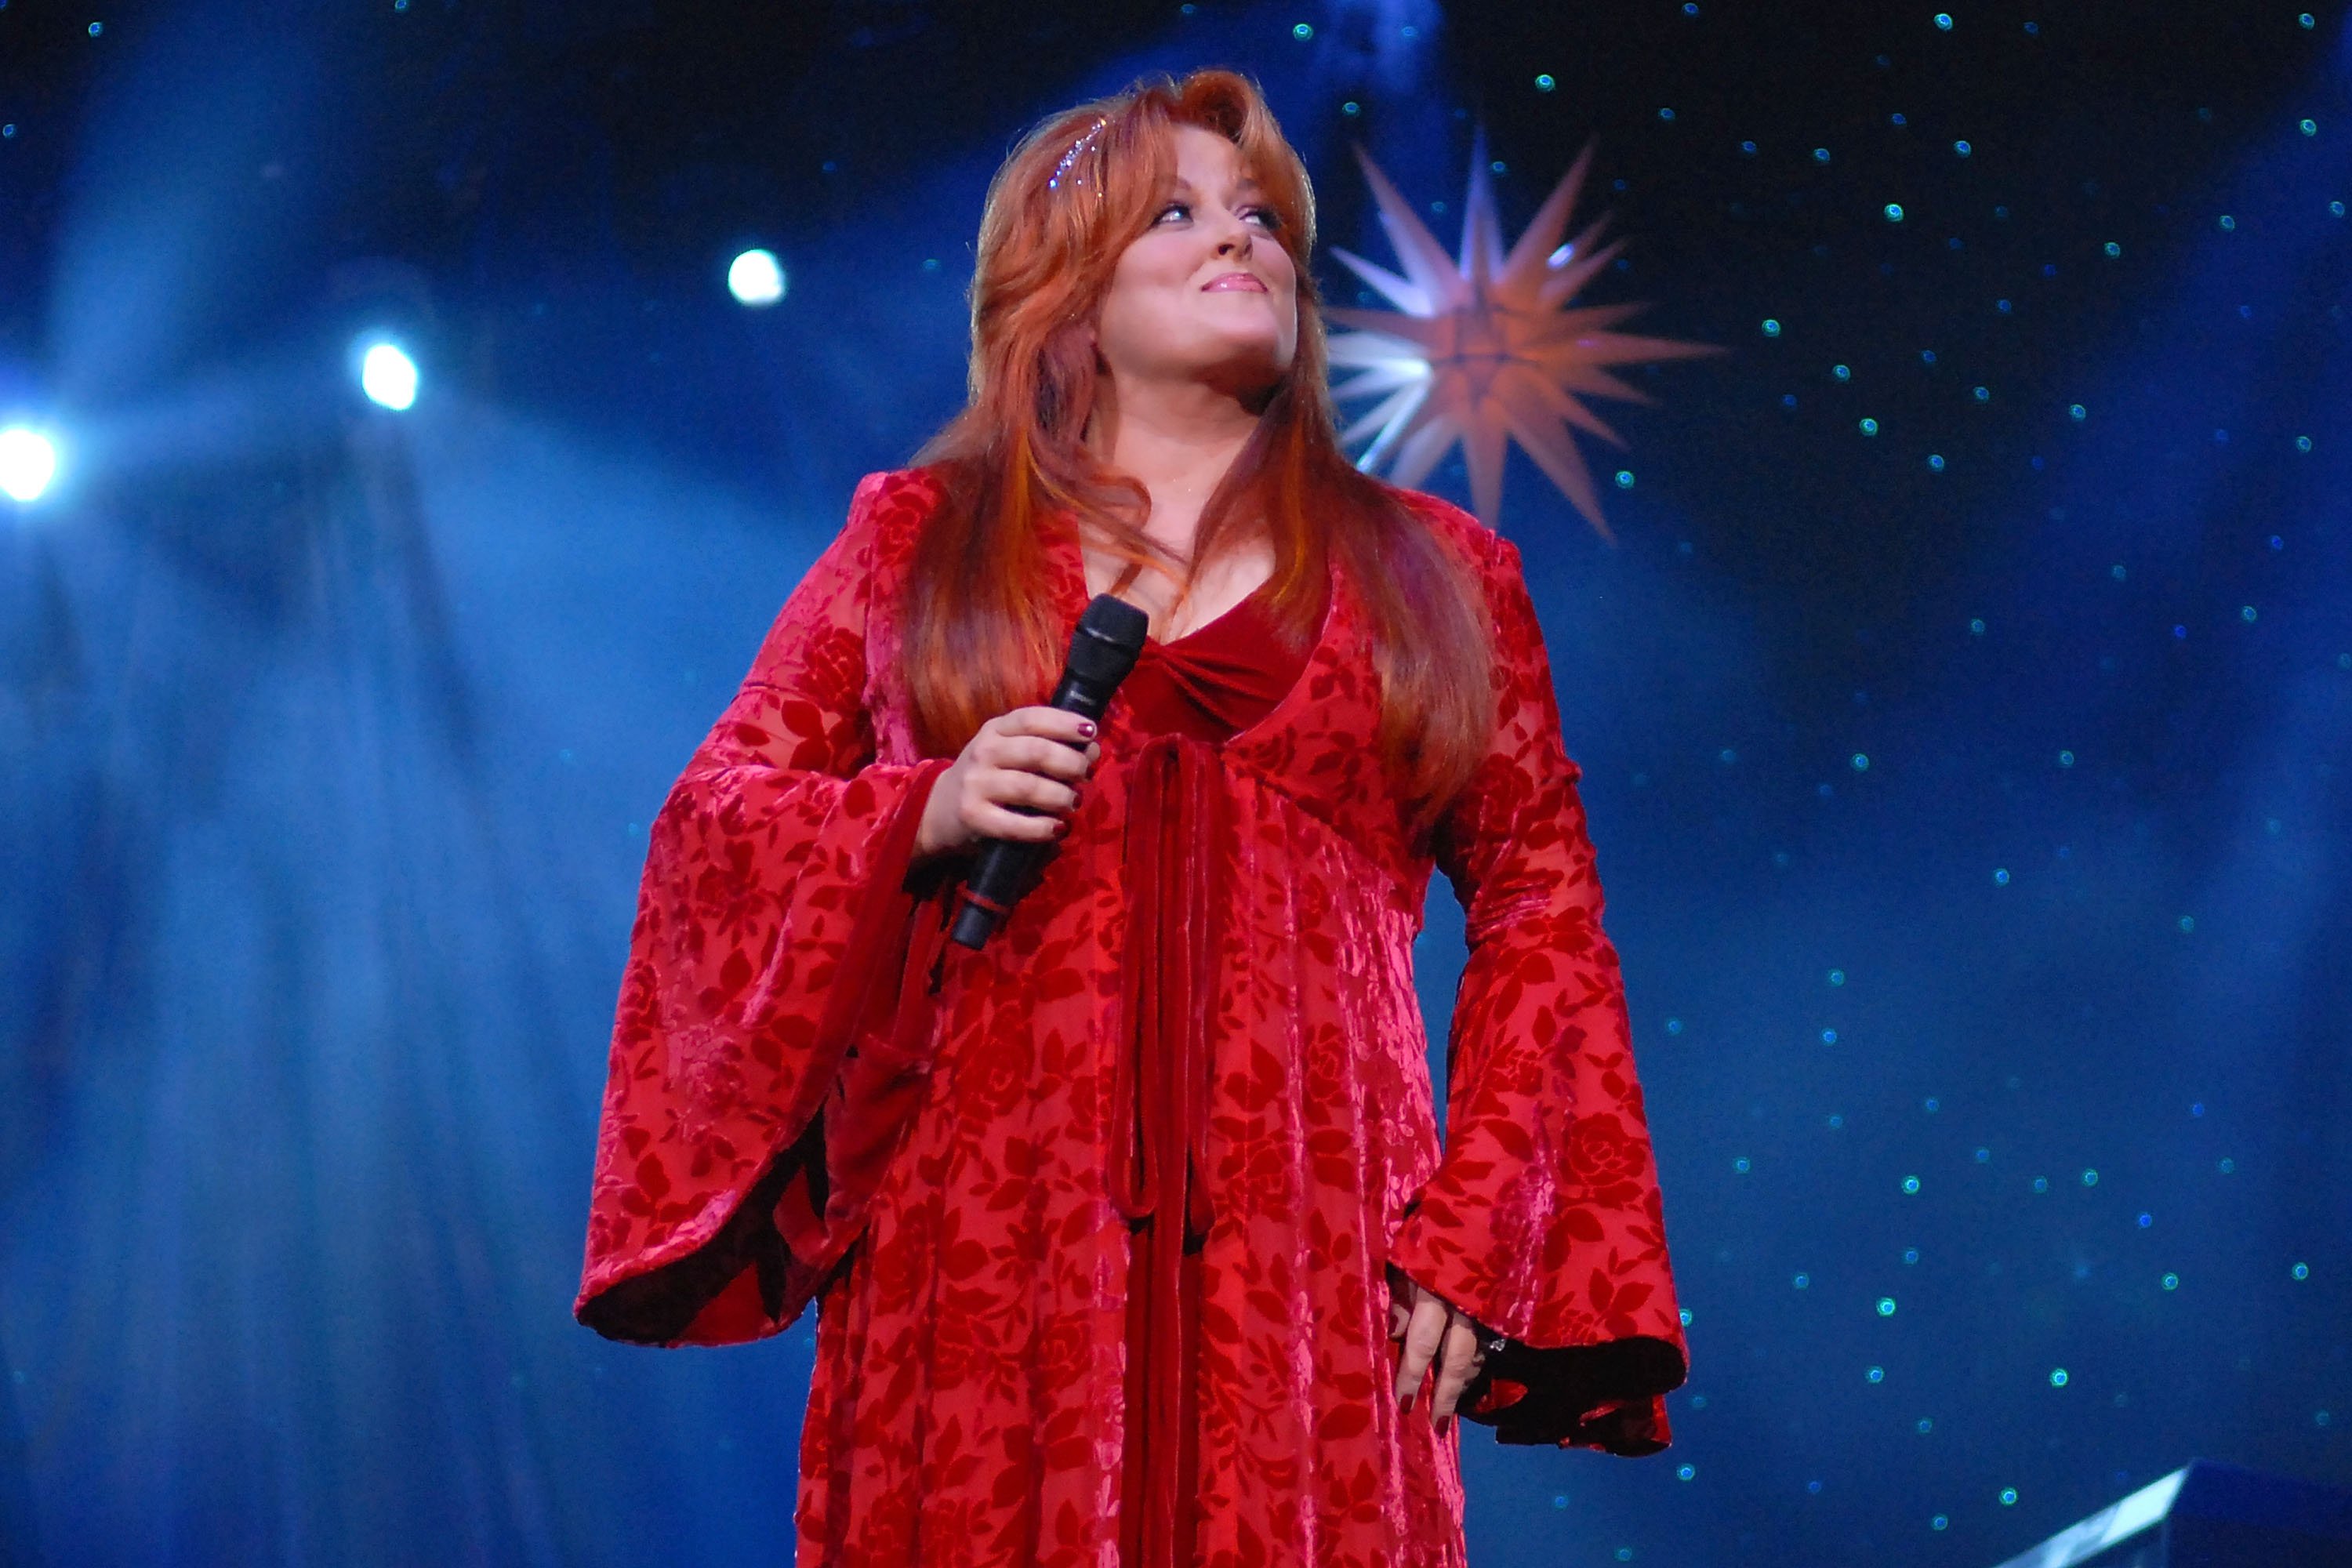 Wynonna Judd performs A Christmas Classic live on November 26, 2007, in Hollywood, Florida. | Source: Jeff Daly/FilmMagic/Getty Images